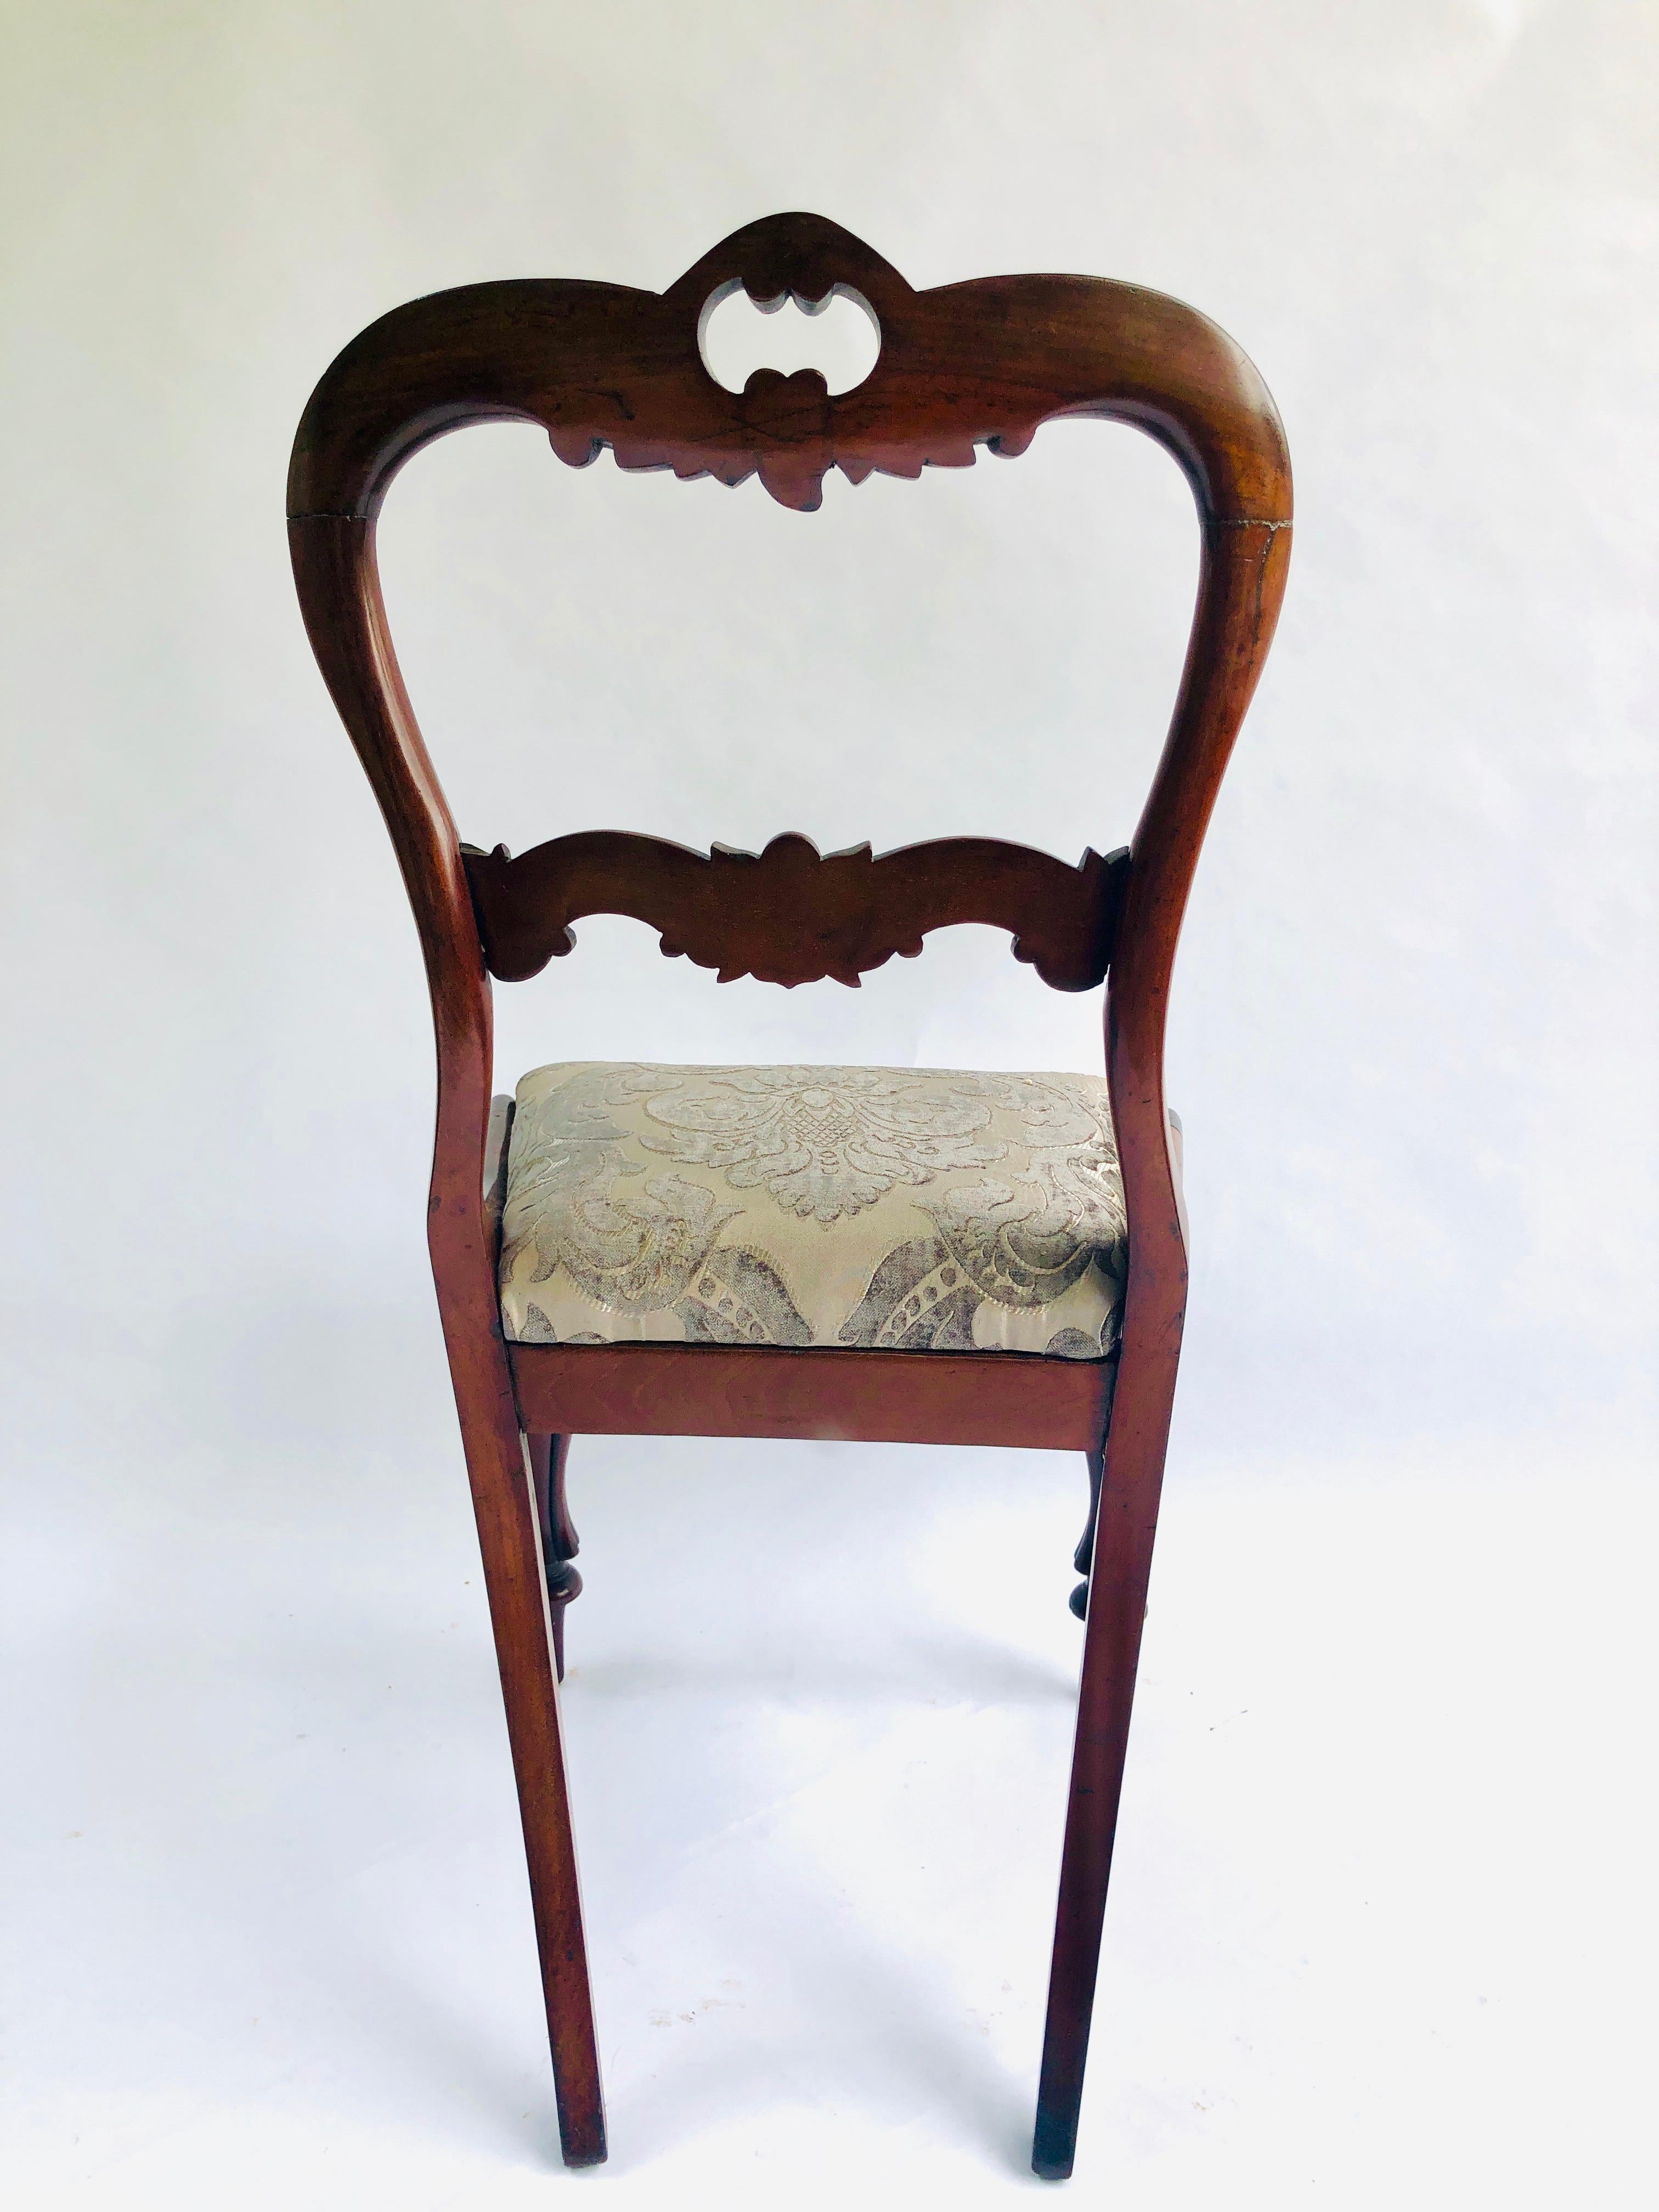 A quality pair of antique William IV carved hardwood side/desk chairs. This pair has a very attractively carved top rail and centre splat. They have been tastefully reupholstered in a quality fabric. They are raised on cabriole legs to the front and